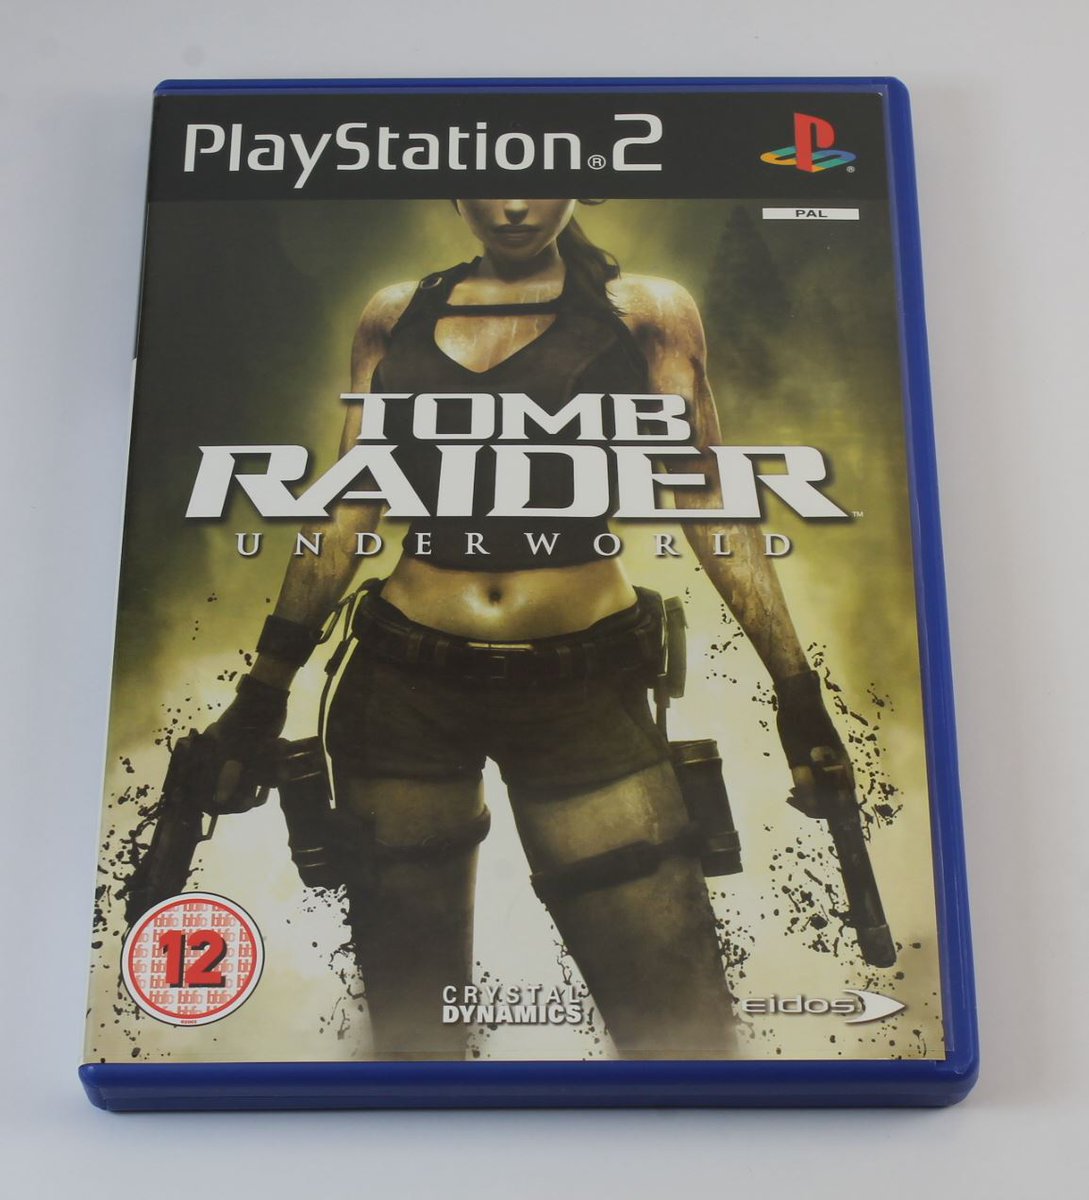 Back in Stock - #PS2: #TombRaiderUnderworld (3 photos) retro-games.co.uk/PS2/Tomb_Raide…